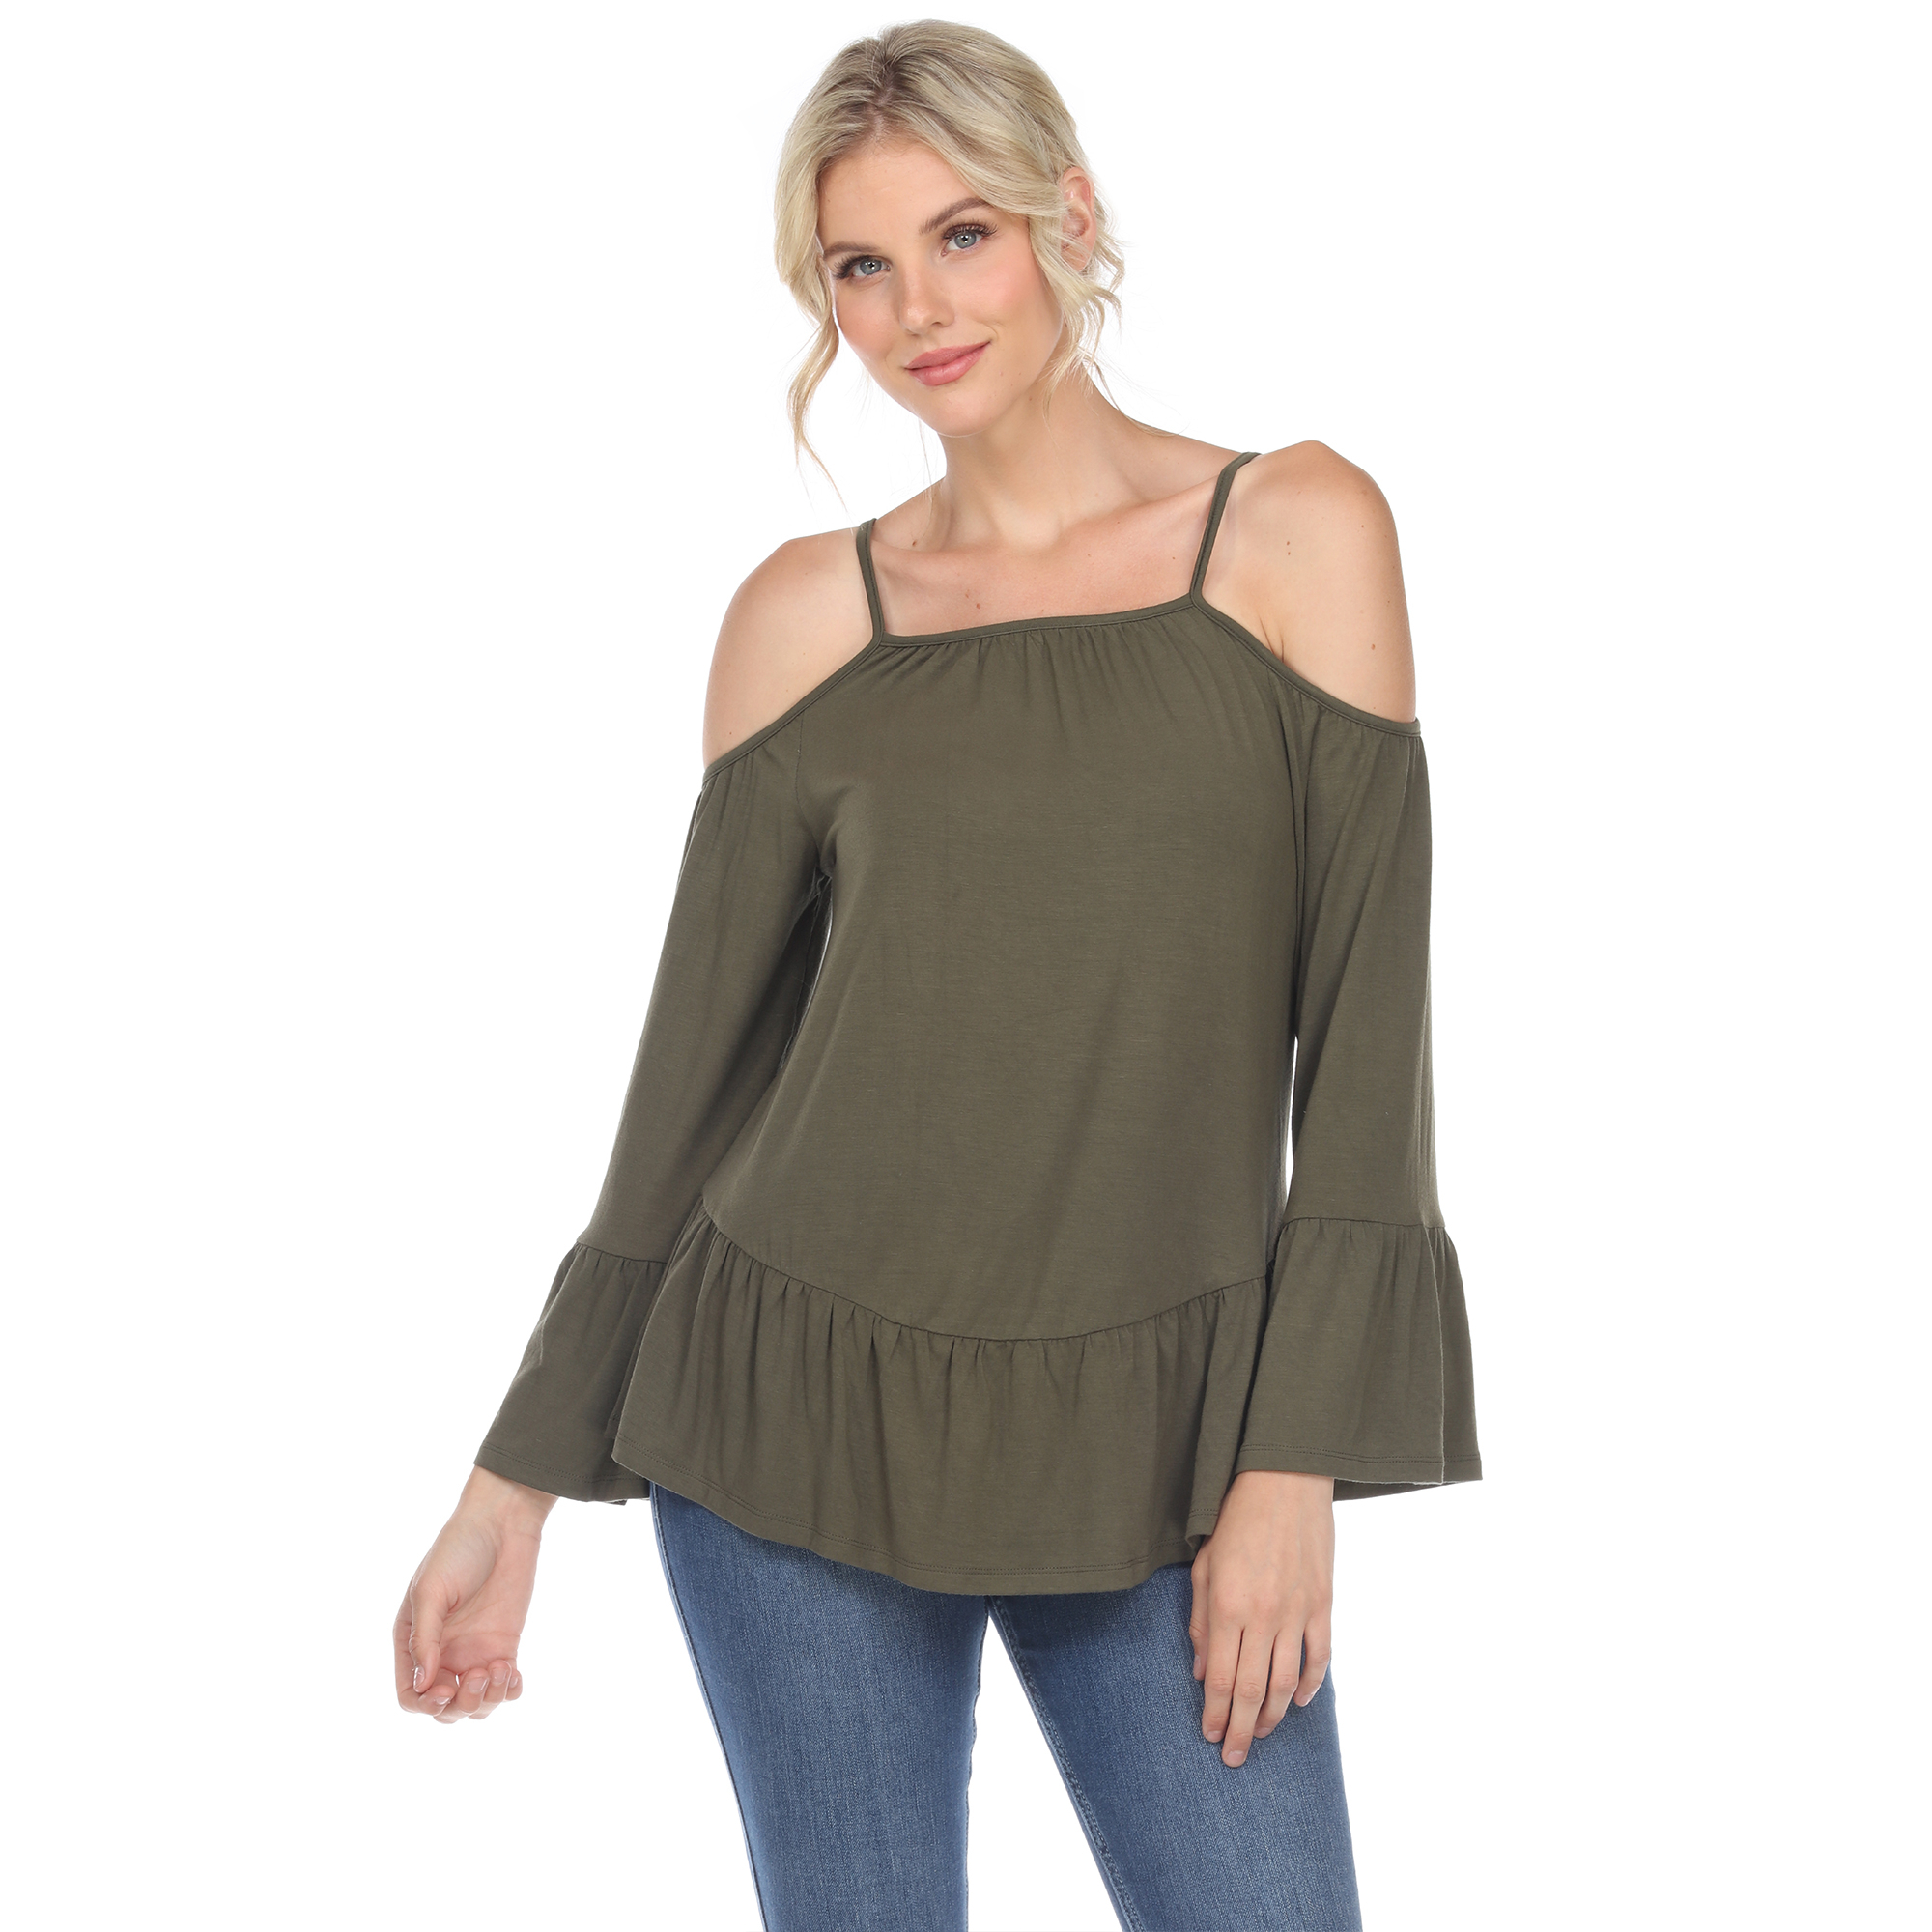 White Mark Women's Cold Shoulder Ruffle Sleeve Top - Olive, Small